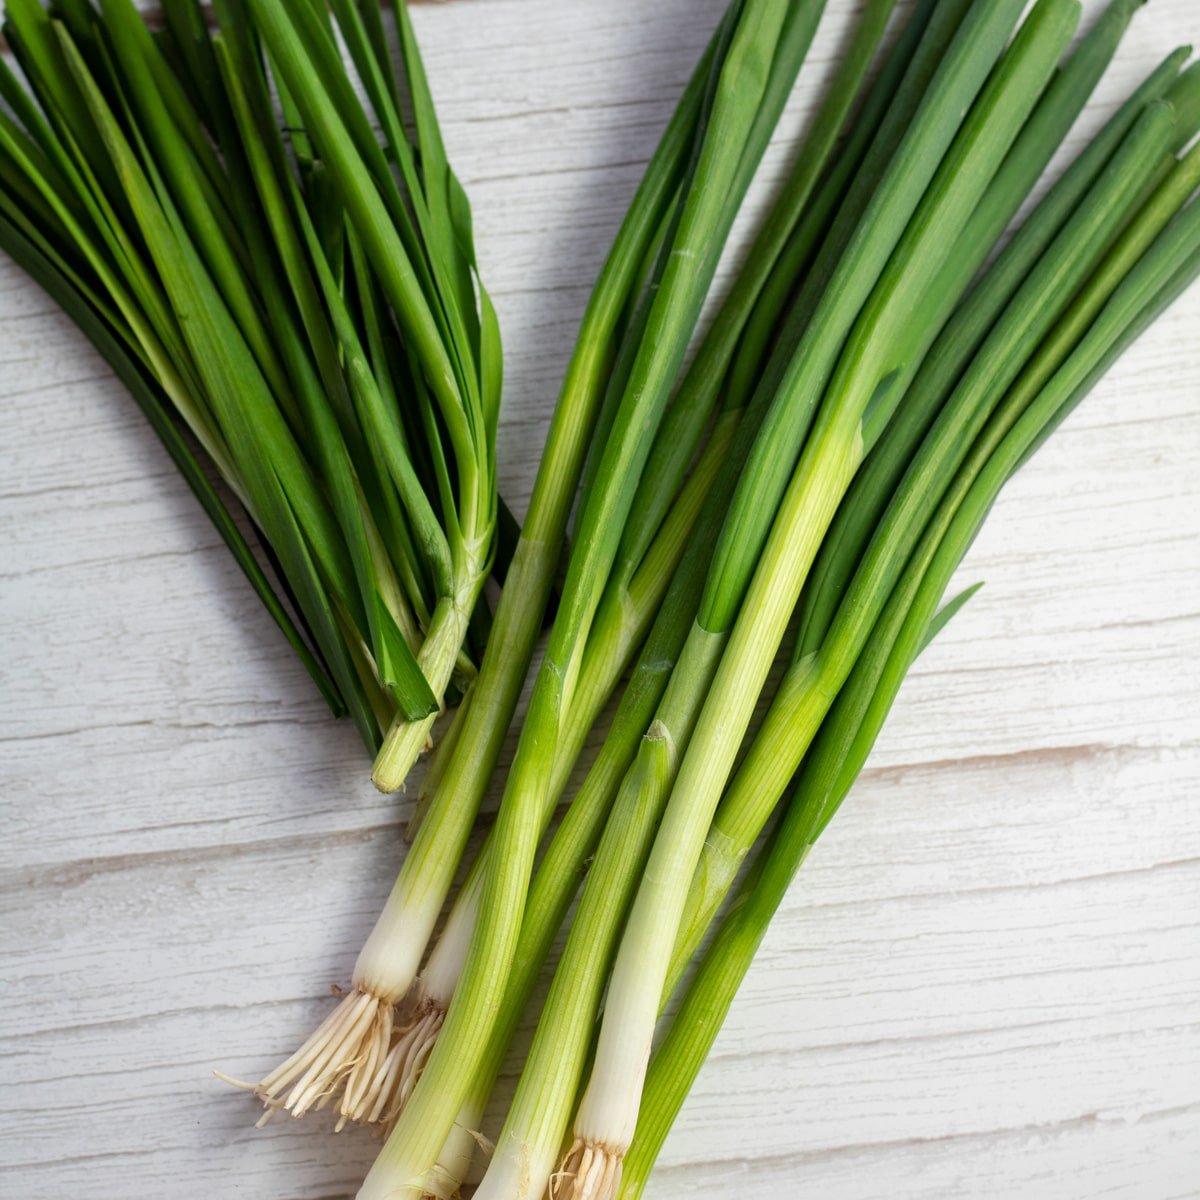 Green onions vs chives image showing both fresh chives and green onions.